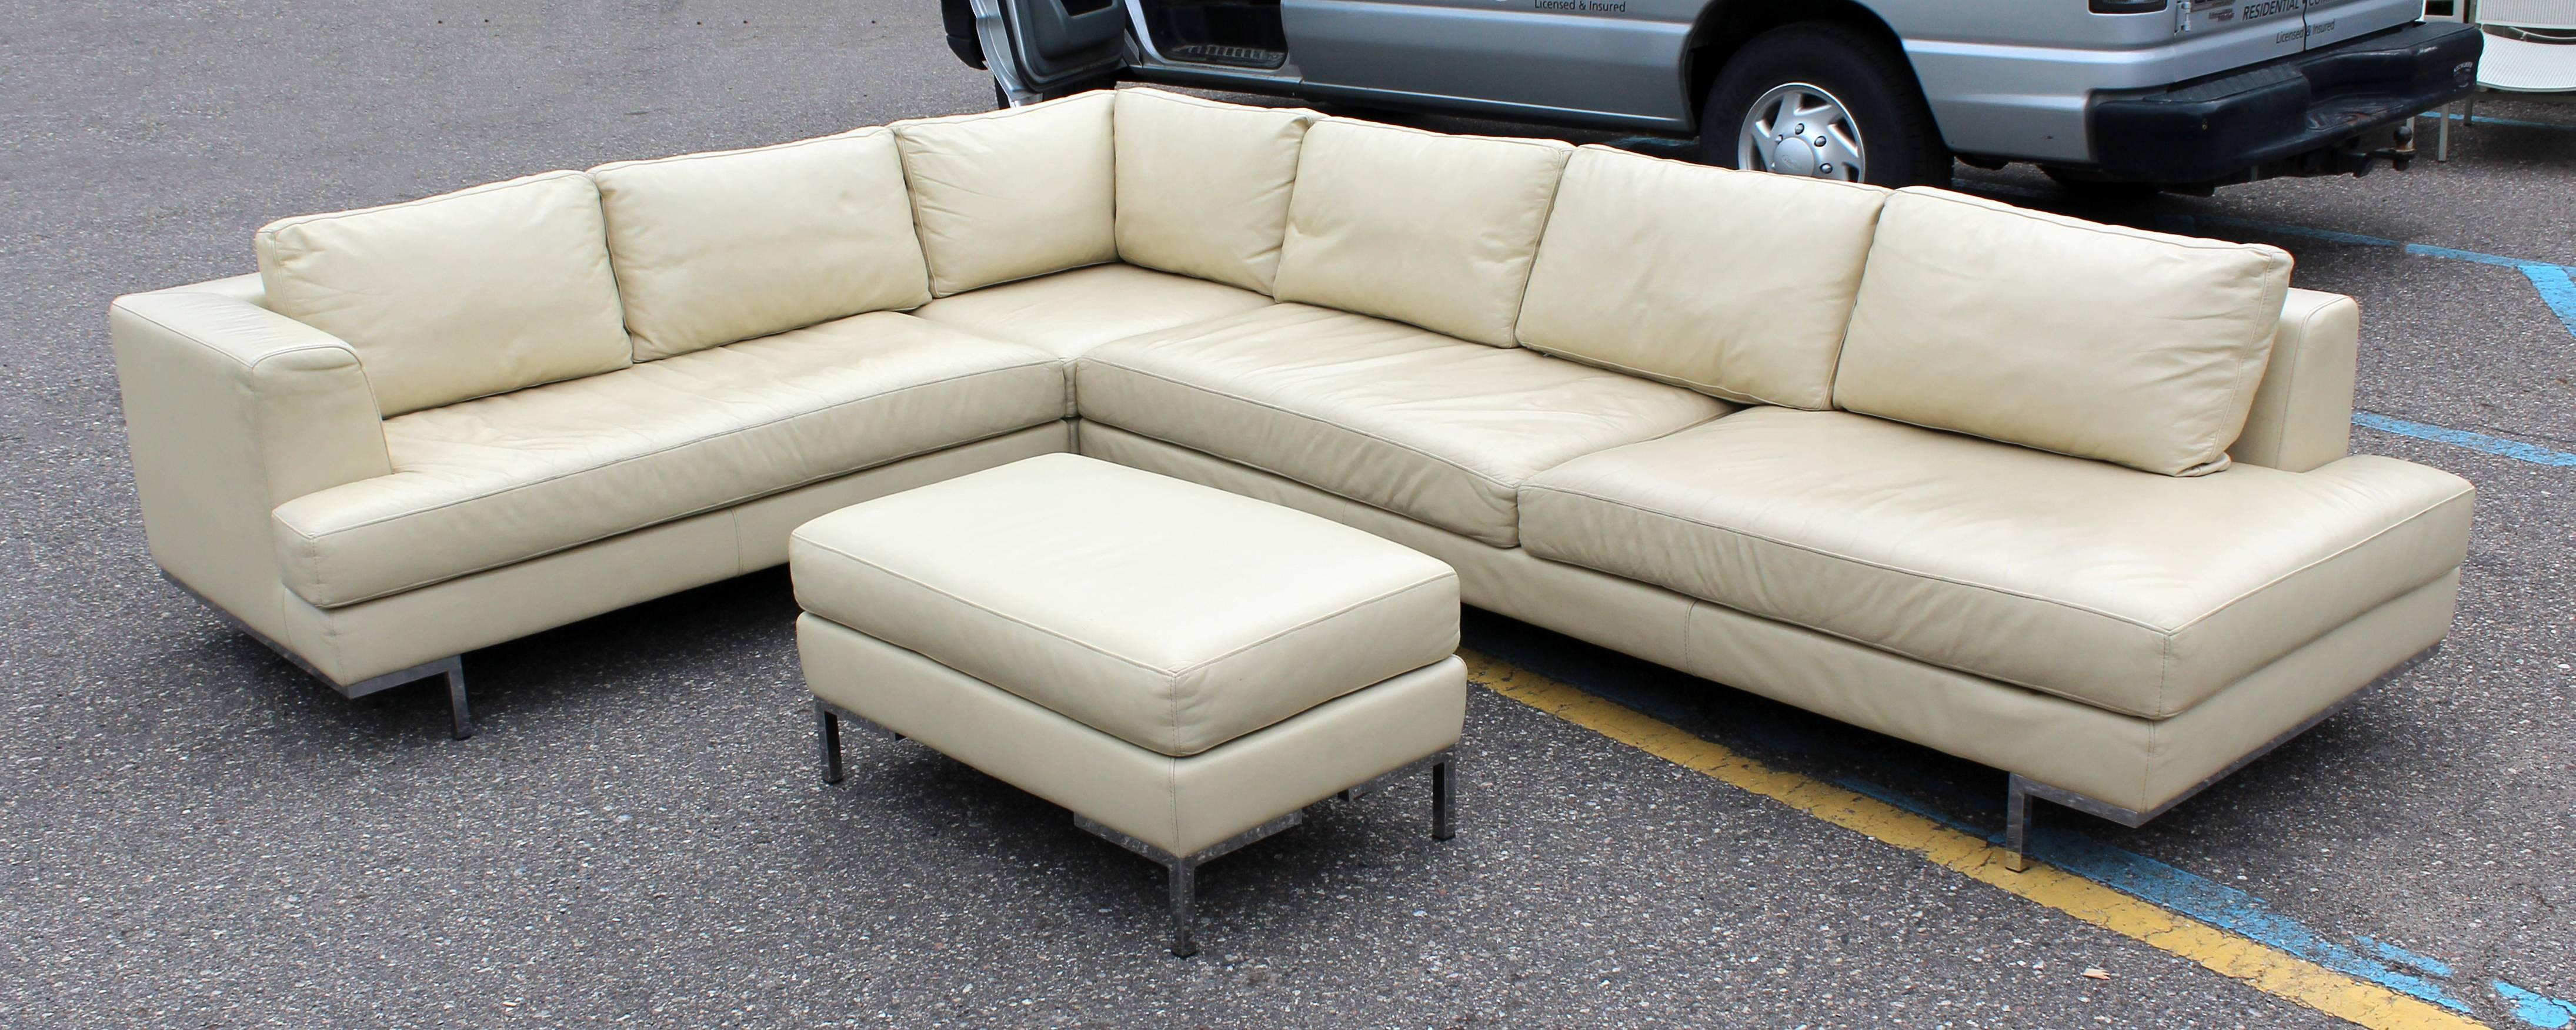 For your consideration is a gorgeous, three piece leather sectional sofa on chrome feet with matching ottoman, possibly B&B Italia. In very good condition. The dimensions of each piece are 92